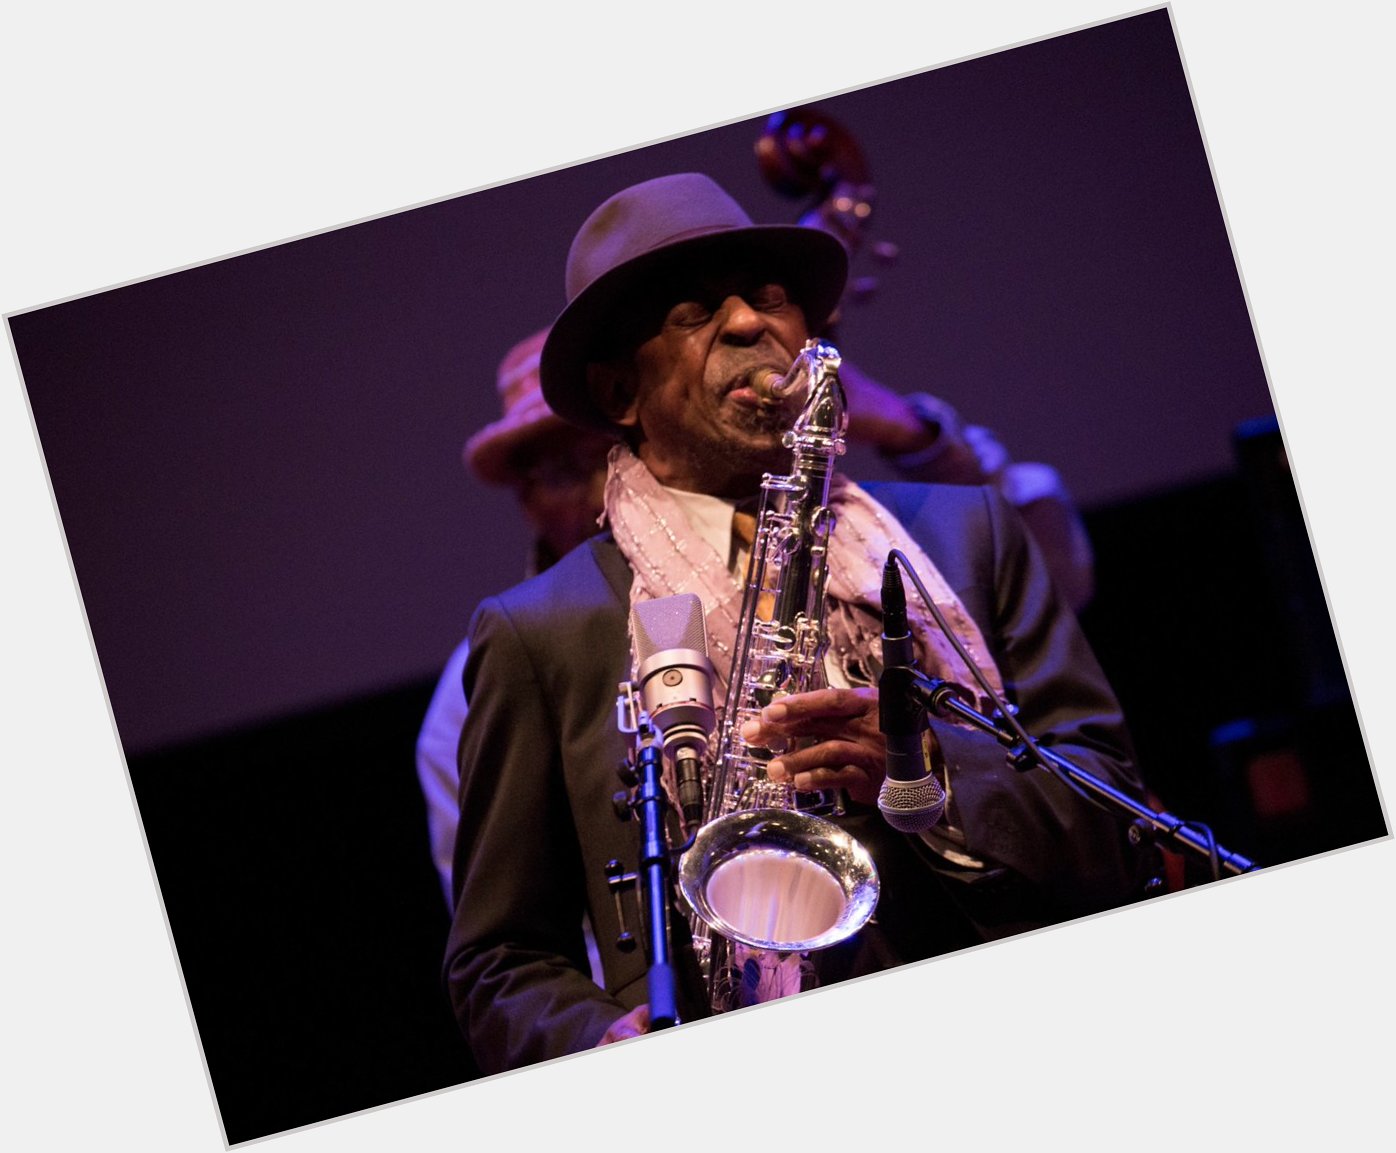 And happy birthday to this guy! So grateful to present Archie Shepp on the night before his 81st birthday! 